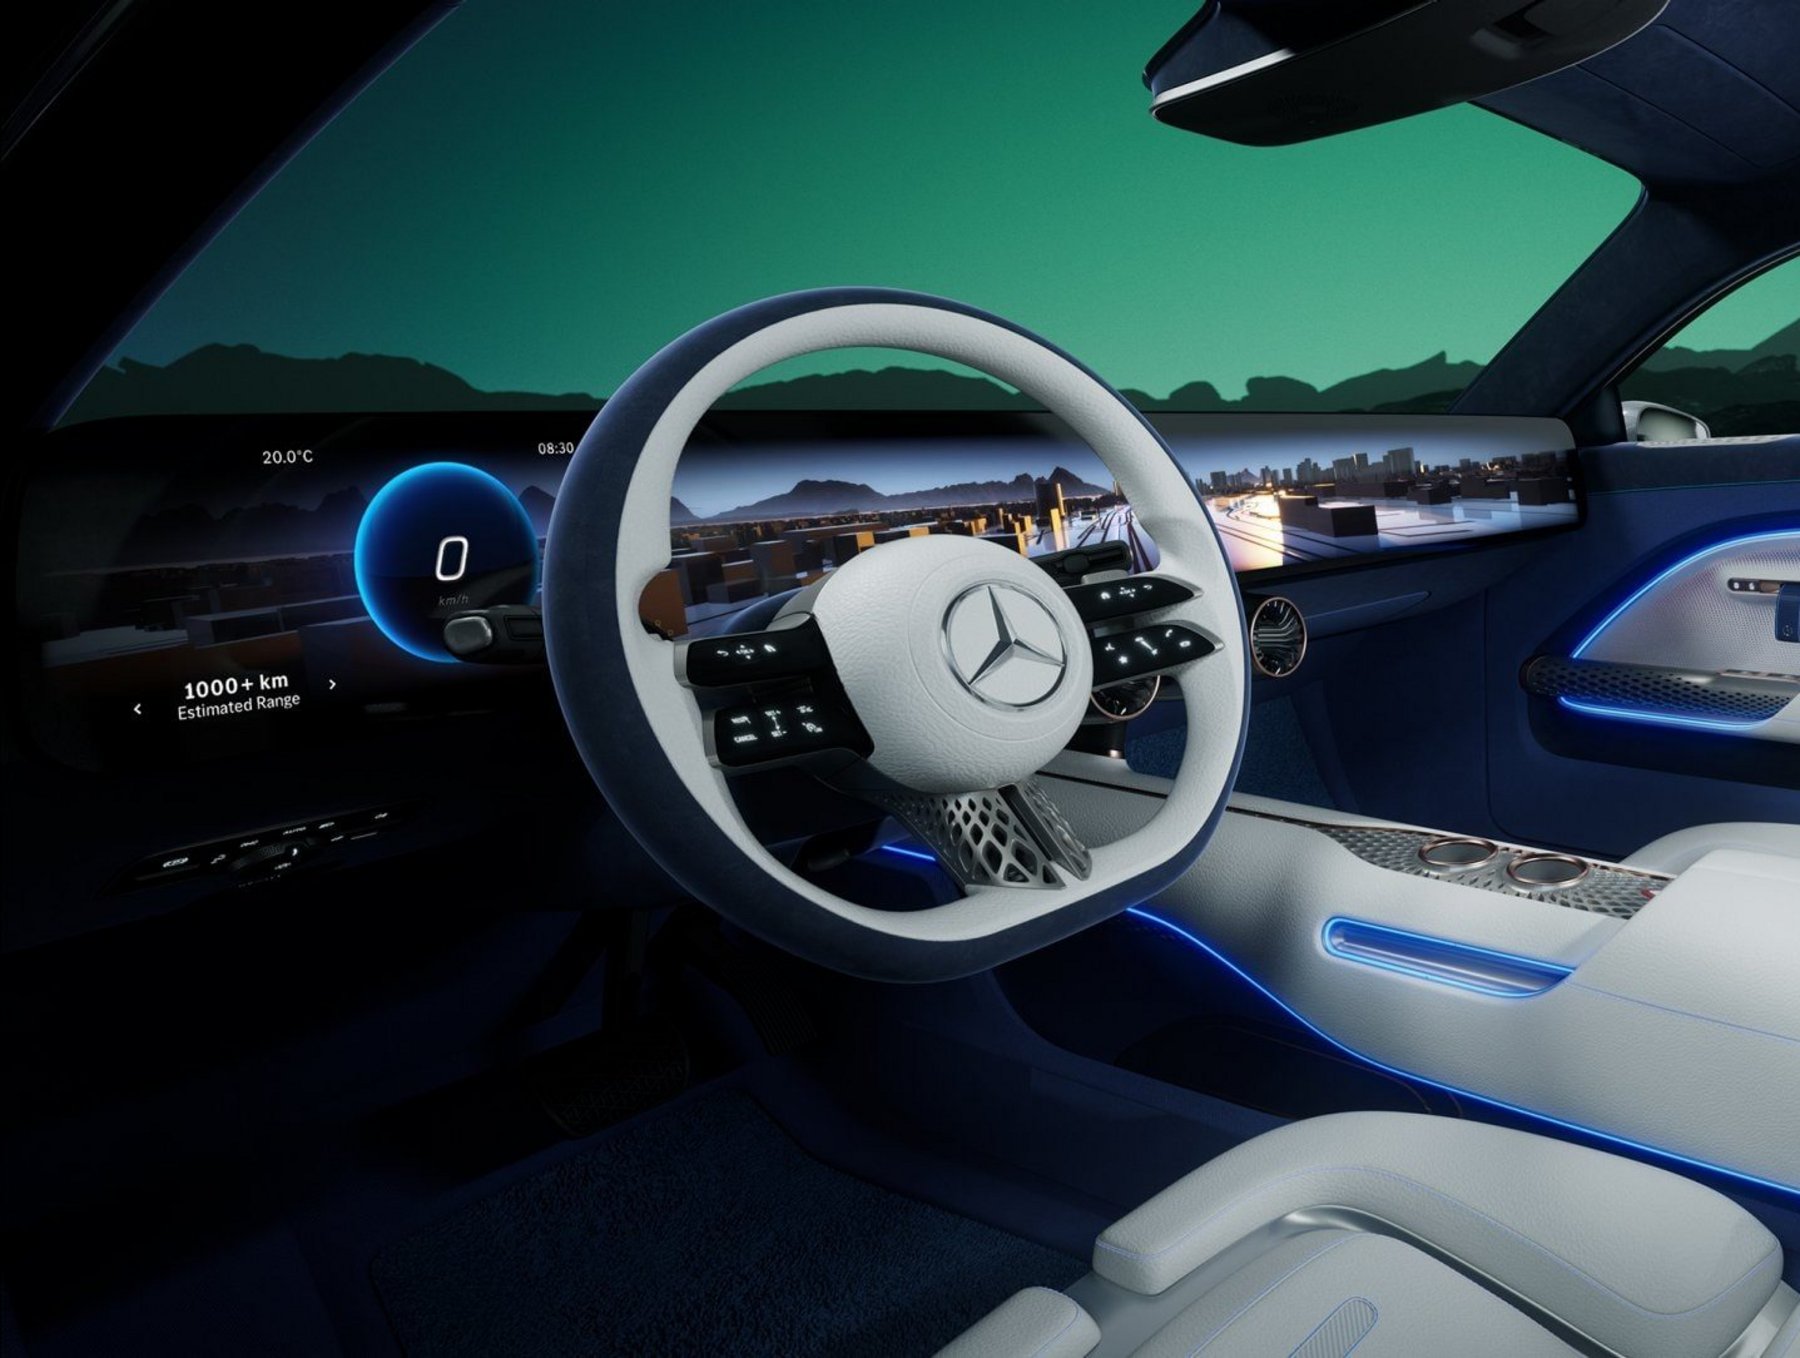 Mercedes-Benz wants to give its interiors a digital makeover